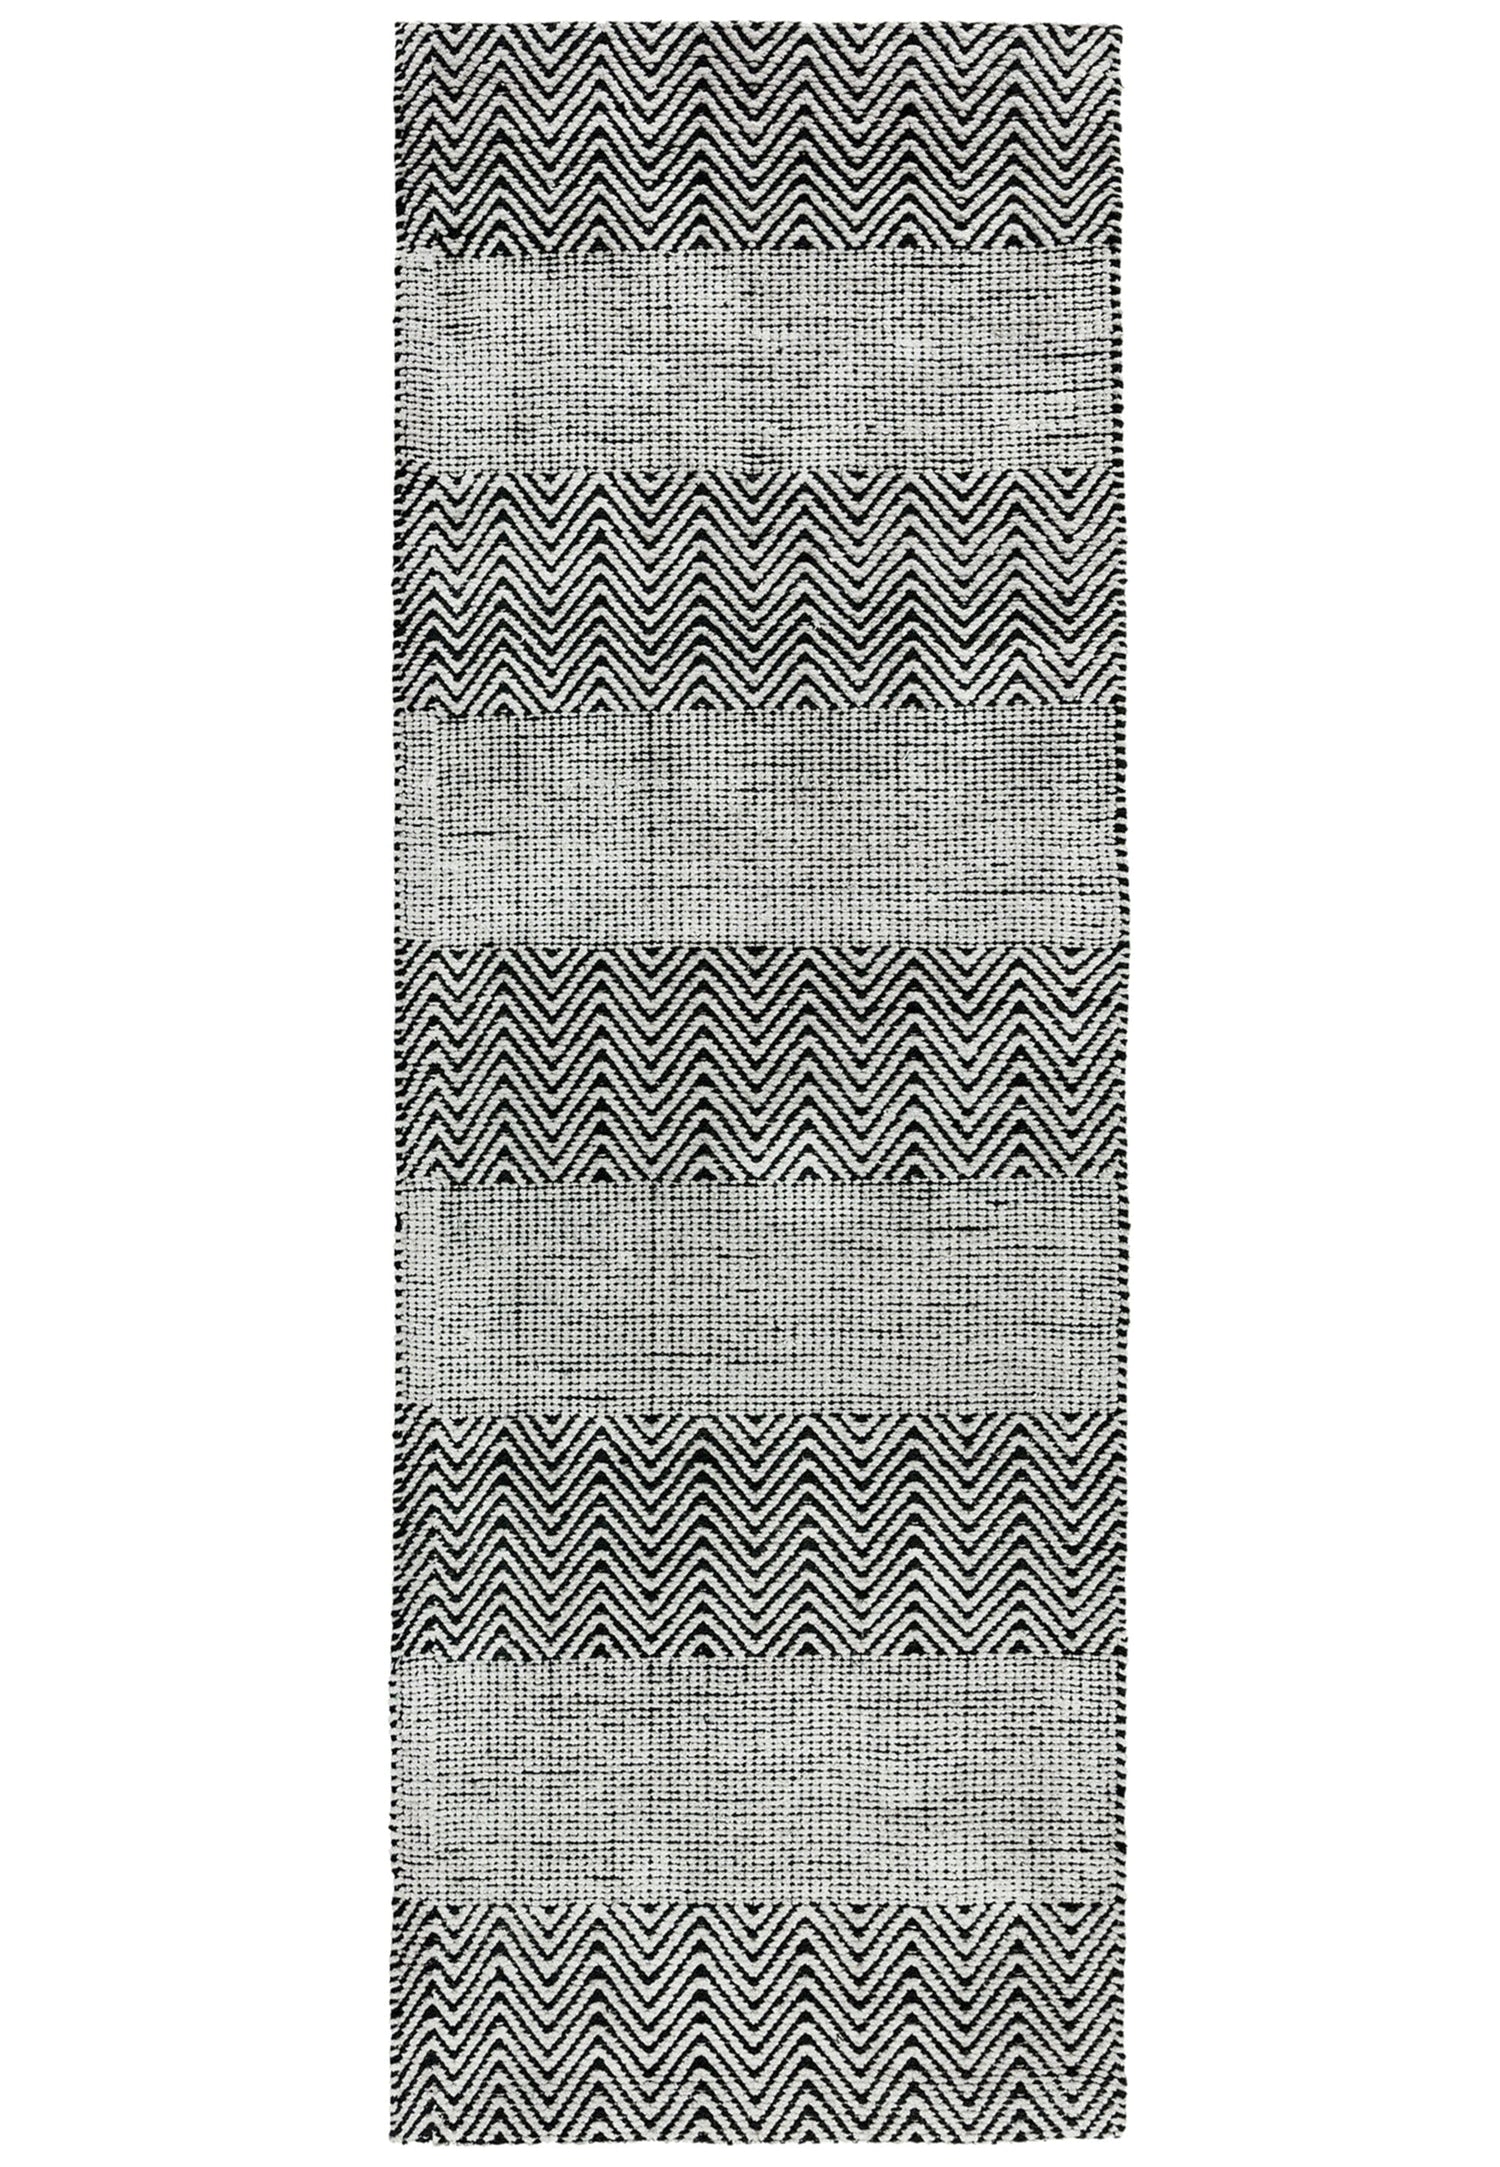  Asiatic Carpets-Asiatic Carpets Ives Hand Woven Rug Grey - 100 x 150cm-Black, White 445 